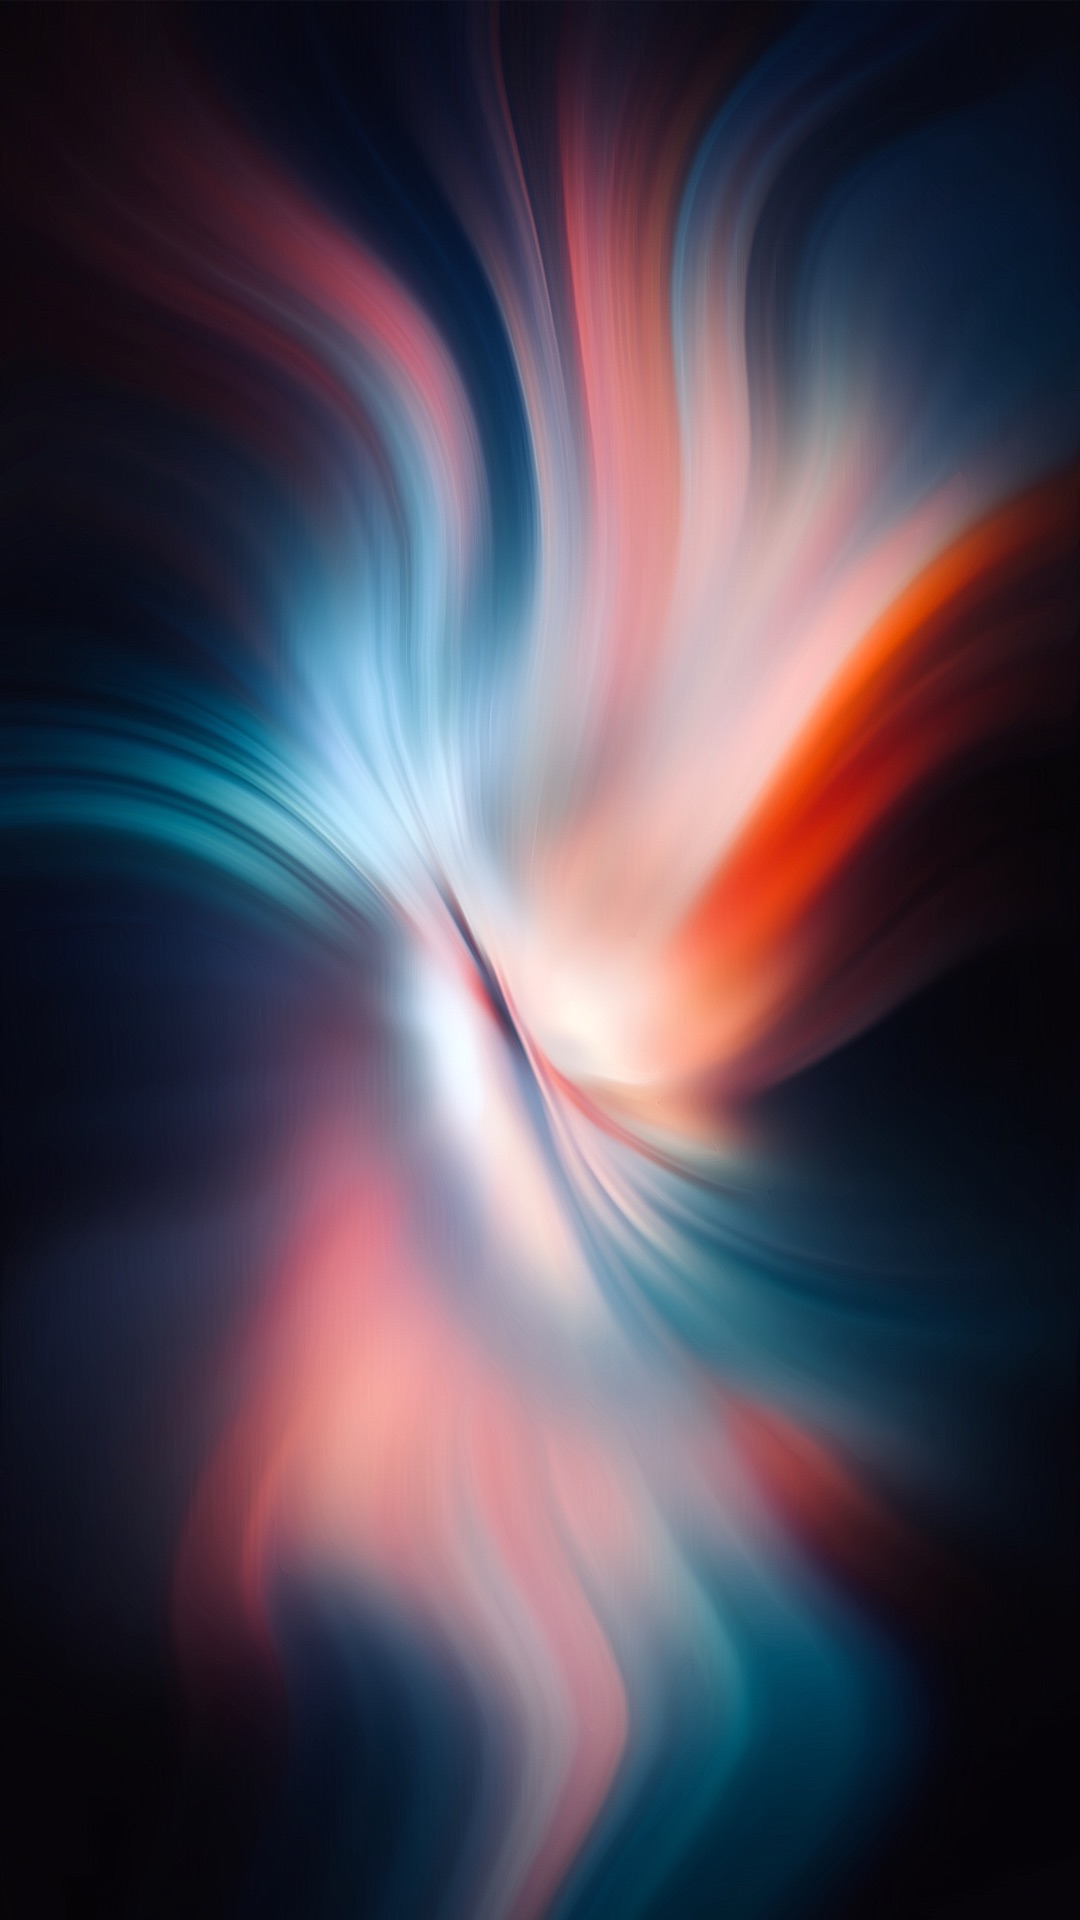 abstract iphone wallpaper,blue,sky,orange,water,graphics